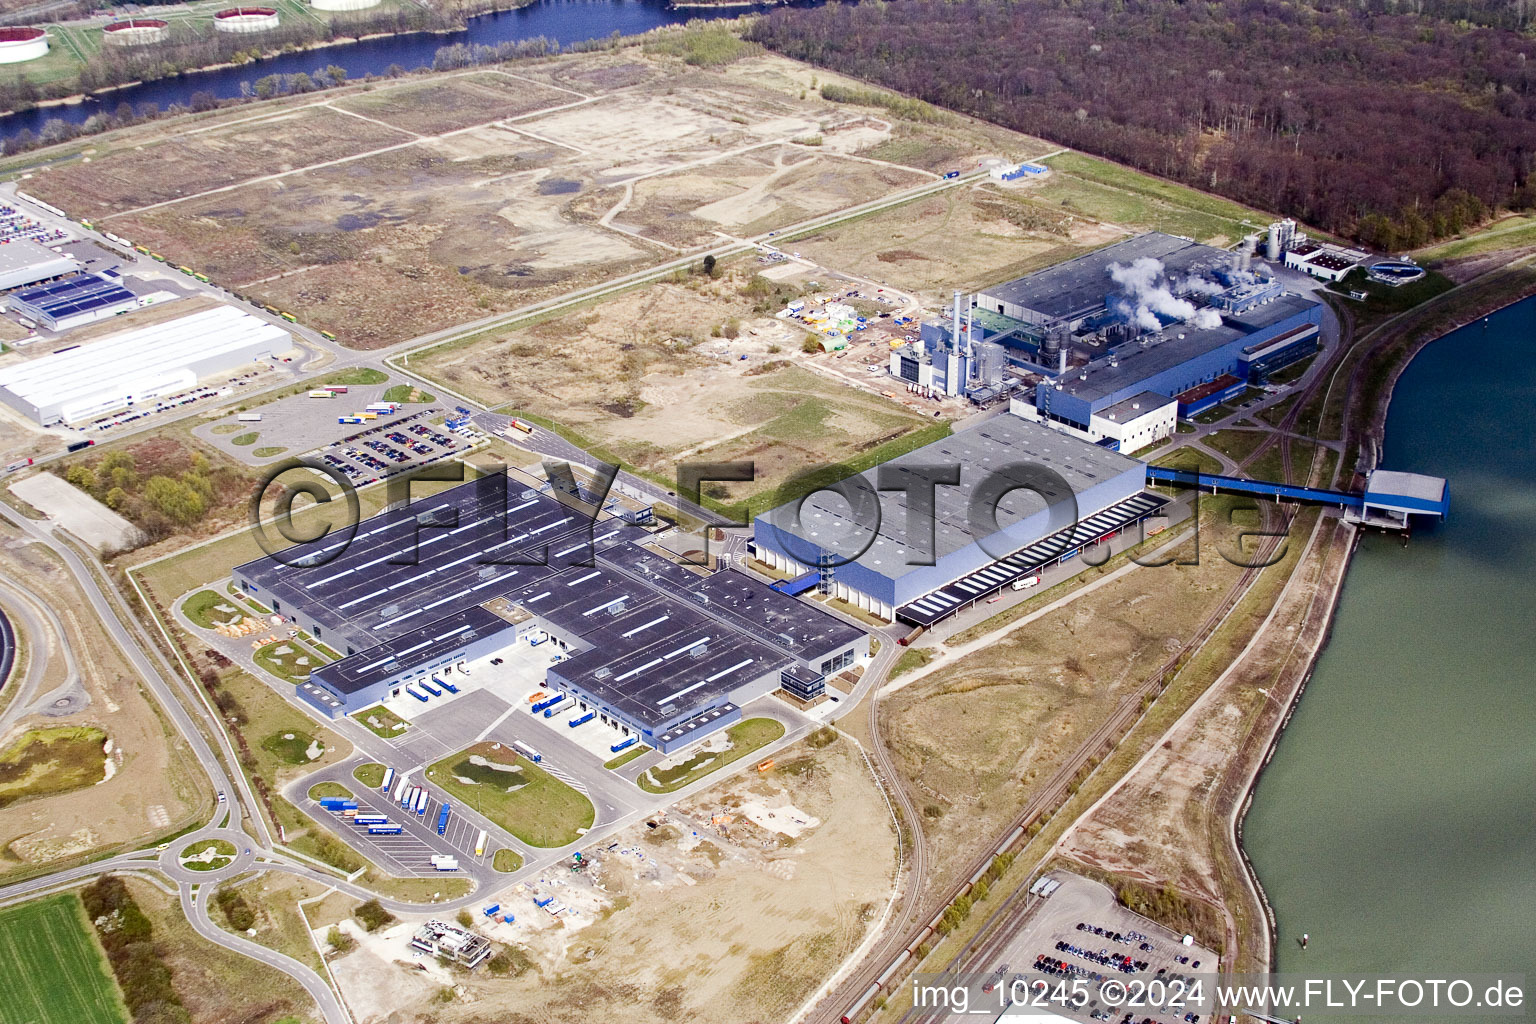 Aerial view of Building and production halls on the premises of Papierfabrik Palm GmbH & Co. KG in the district Industriegebiet Woerth-Oberwald in Woerth am Rhein in the state Rhineland-Palatinate, Germany